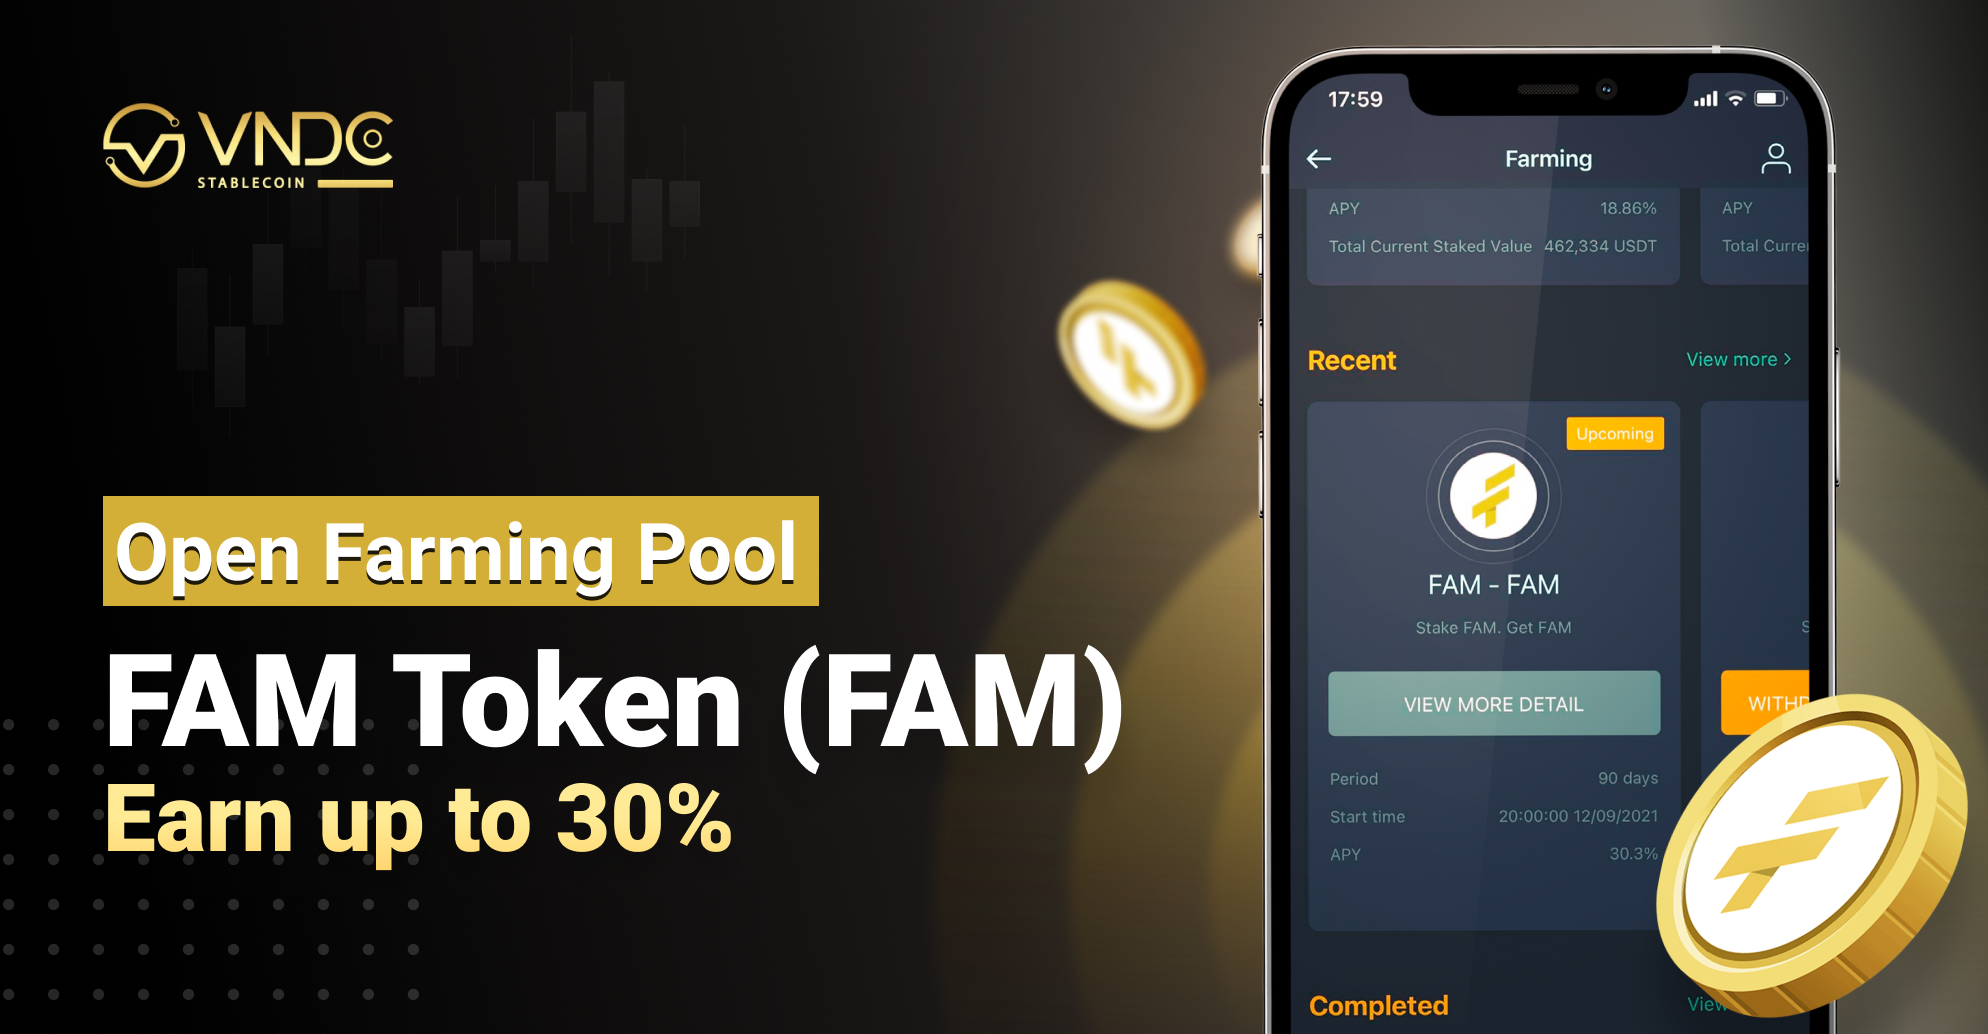 Open Farming Pool for FAM Token, Earn up to 30% APY